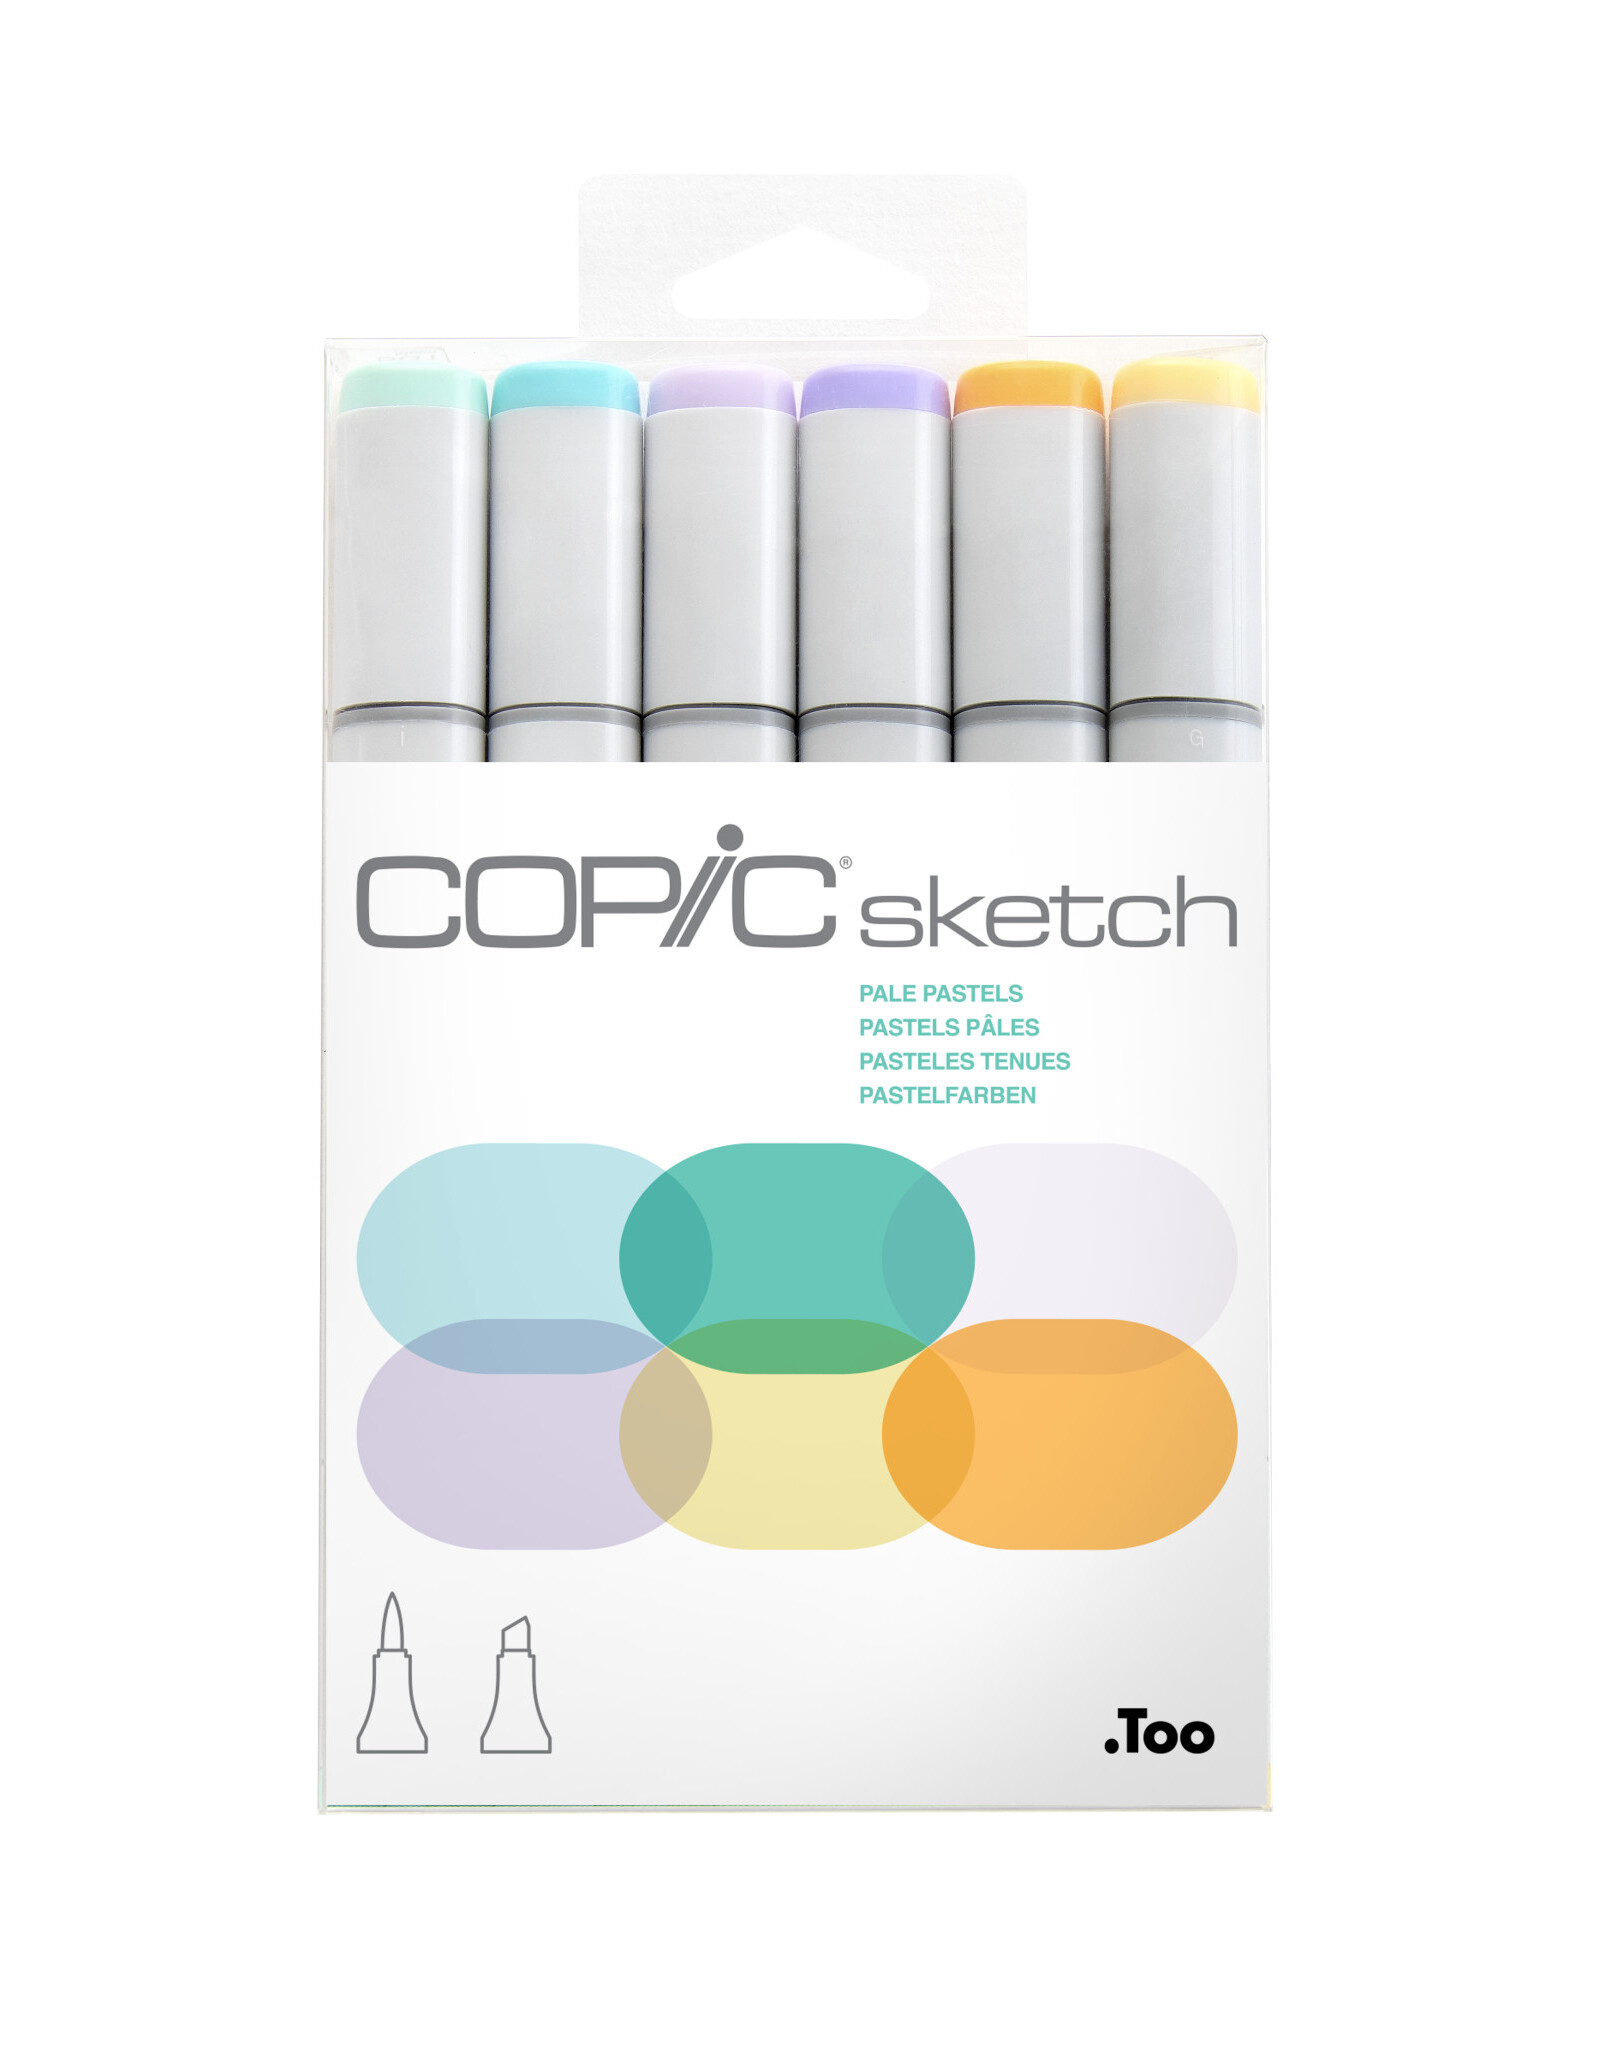 Copic Sketch Marker Set of 6 PRIMARY 